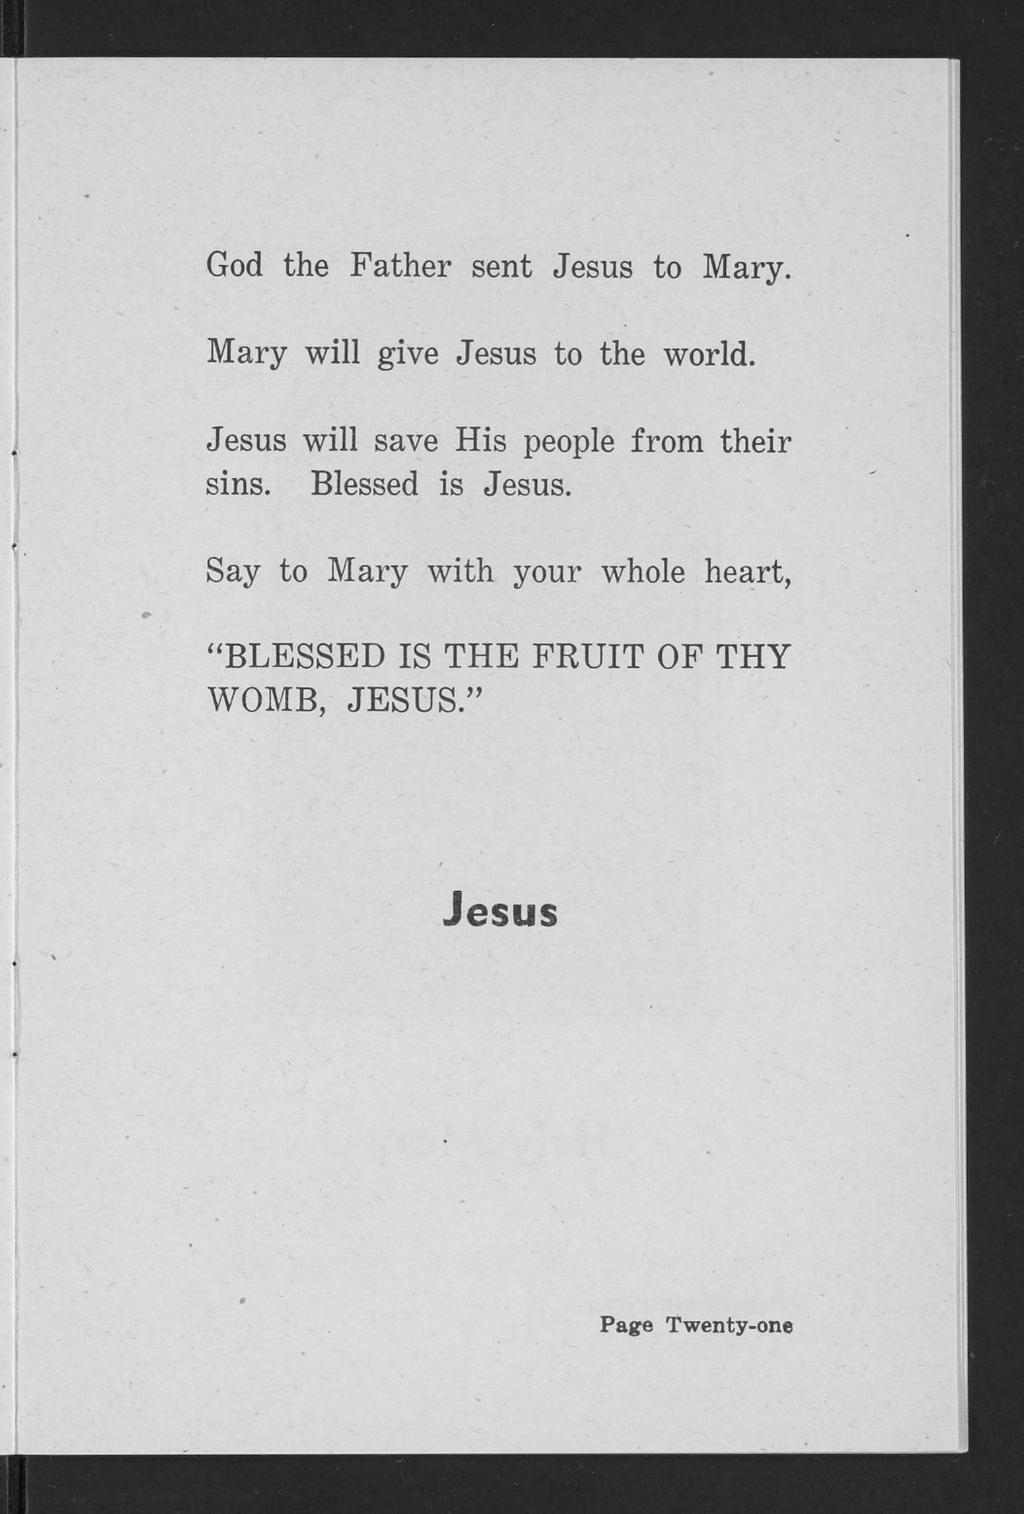 God the Father sent Jesus to Mary. Mary will give Jesus to the world. Jesus will save His people from their sins.